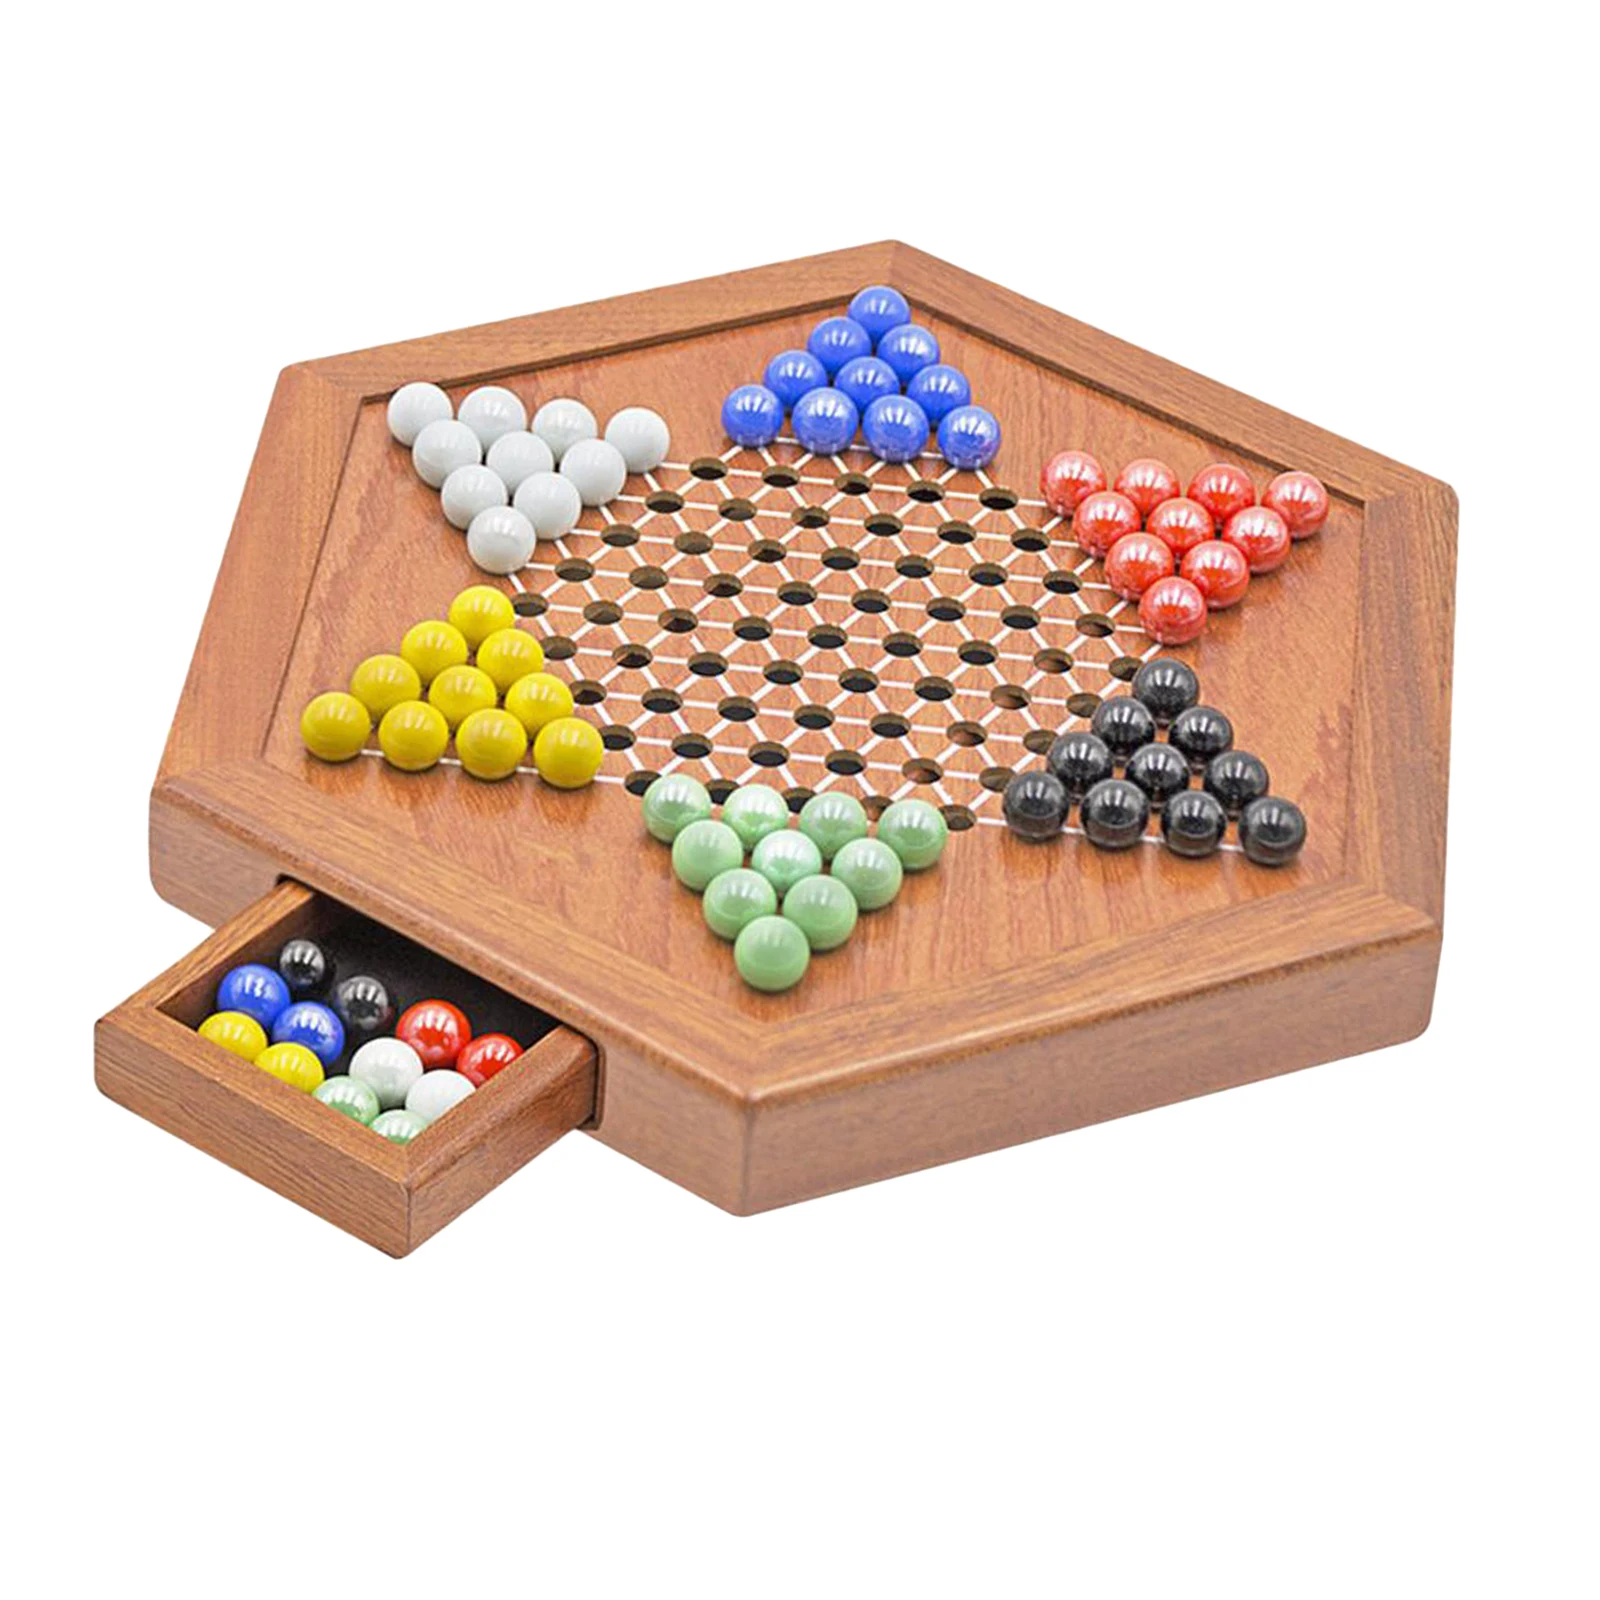 Classic Wooden Chinese Checkers 12 Inches with Drawers Halma Board Game Fine Glass Beads Family Multiplayer